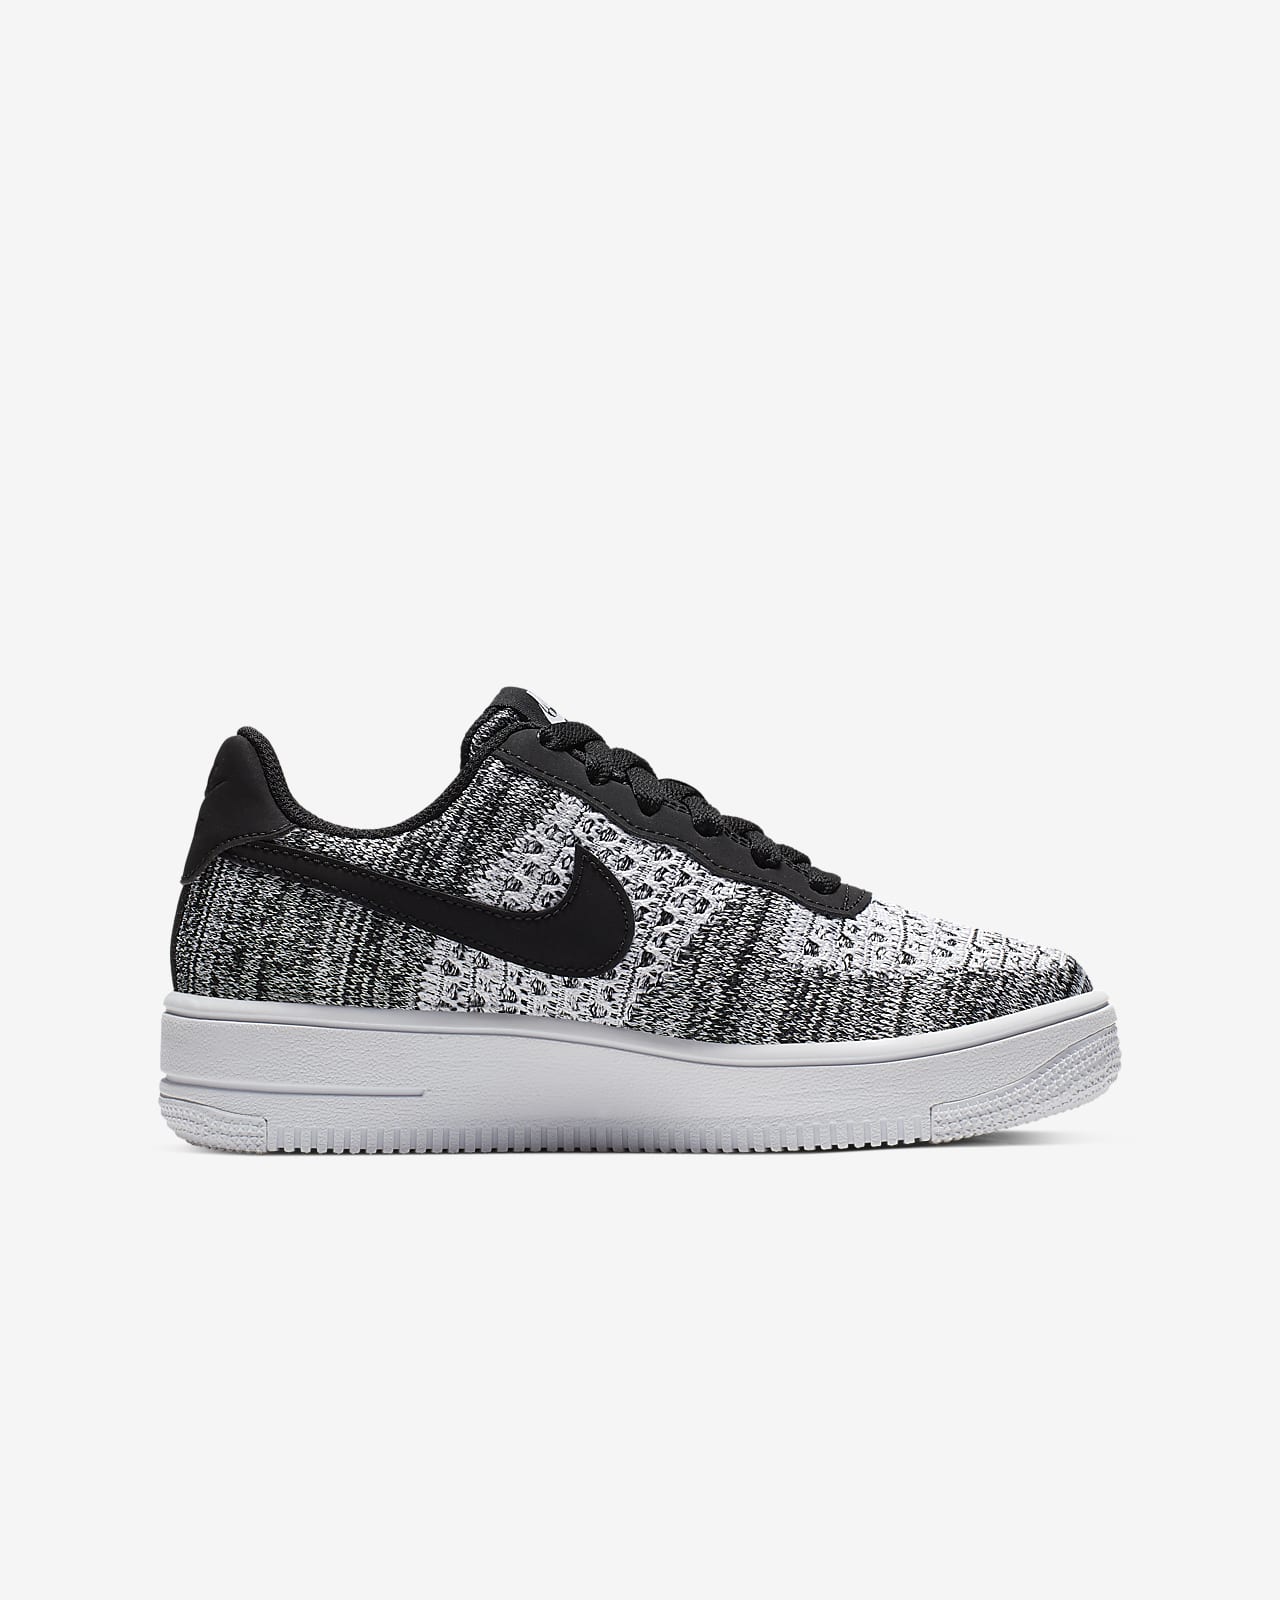 Chaussure Nike Air Force 1 Flyknit 2.0 